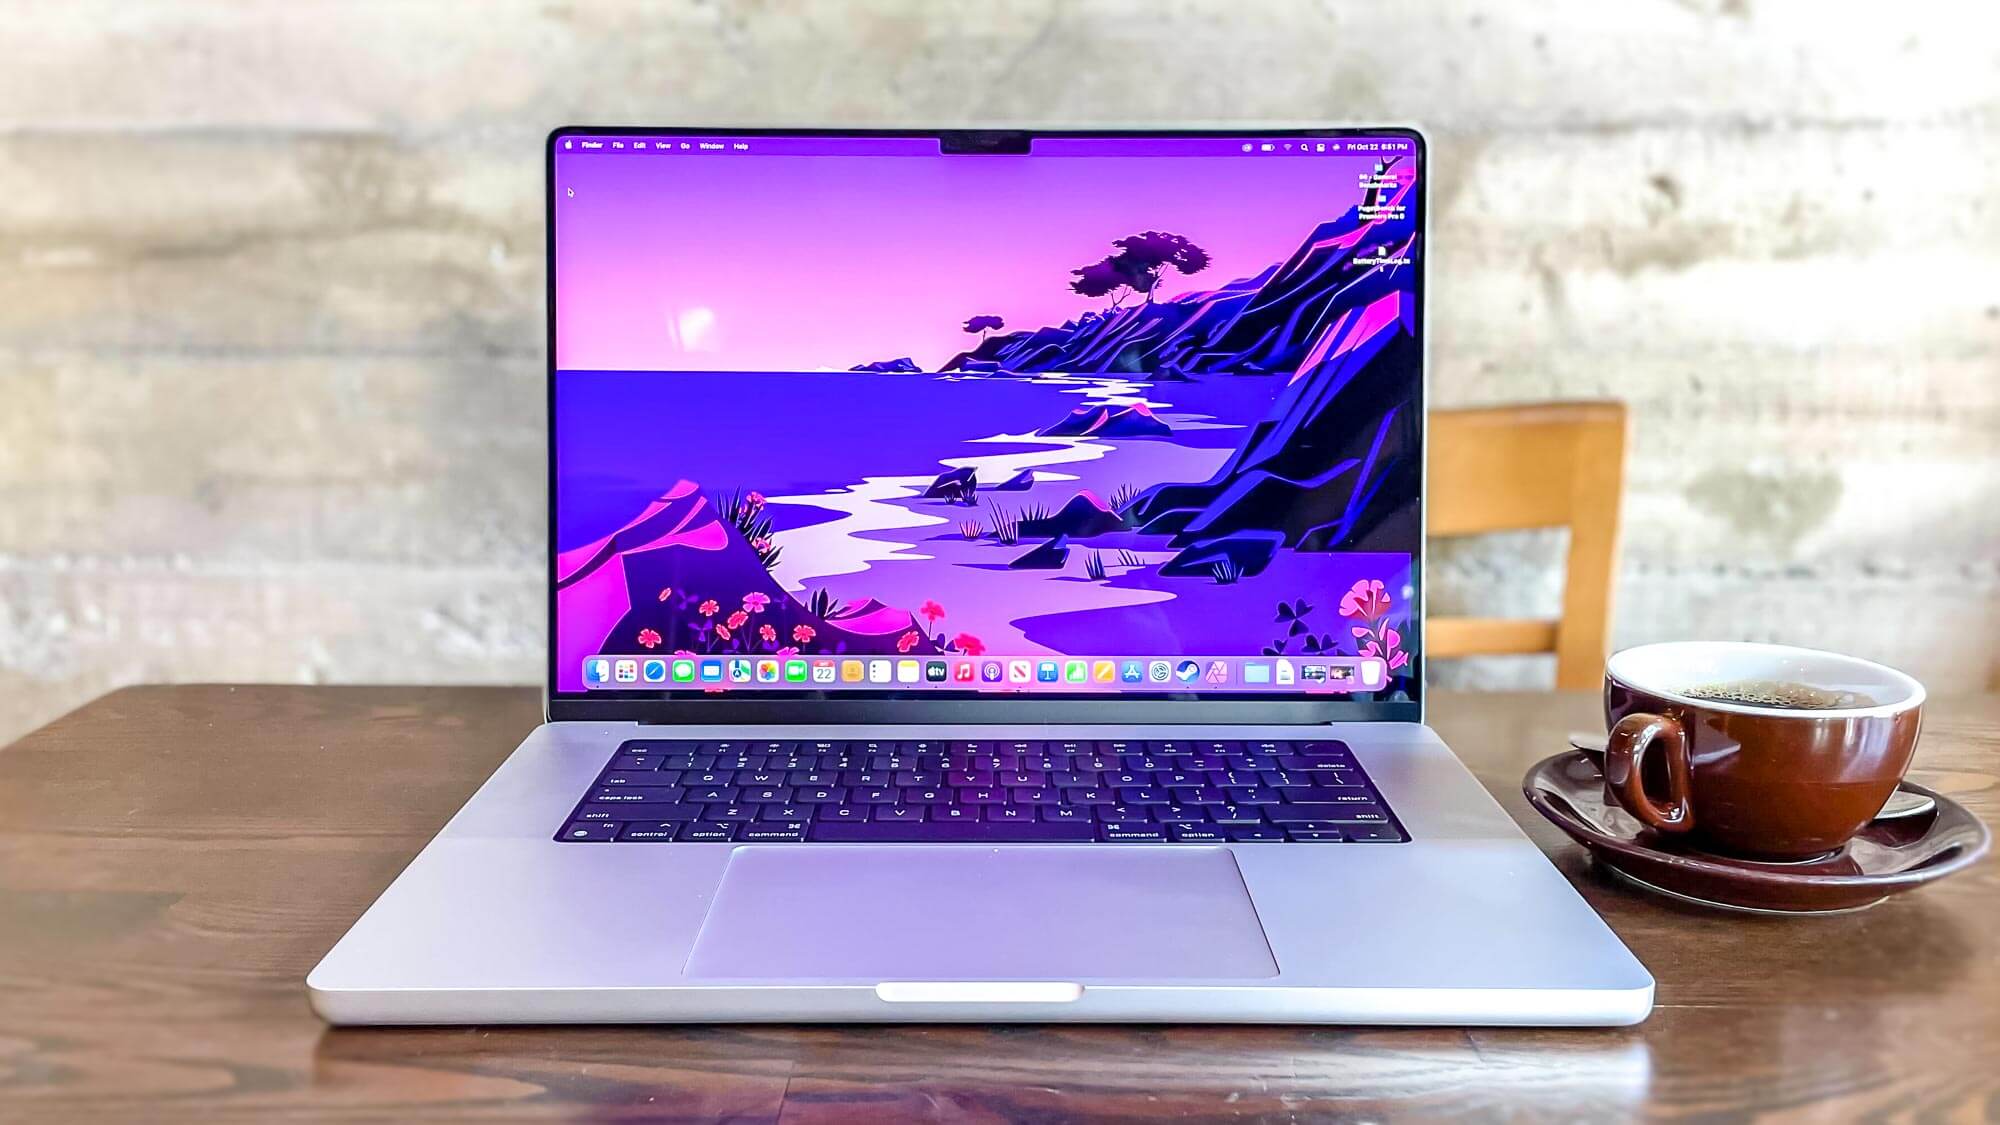 The big brother of the 14-inch MacBook, the 16-inch MacBook Pro